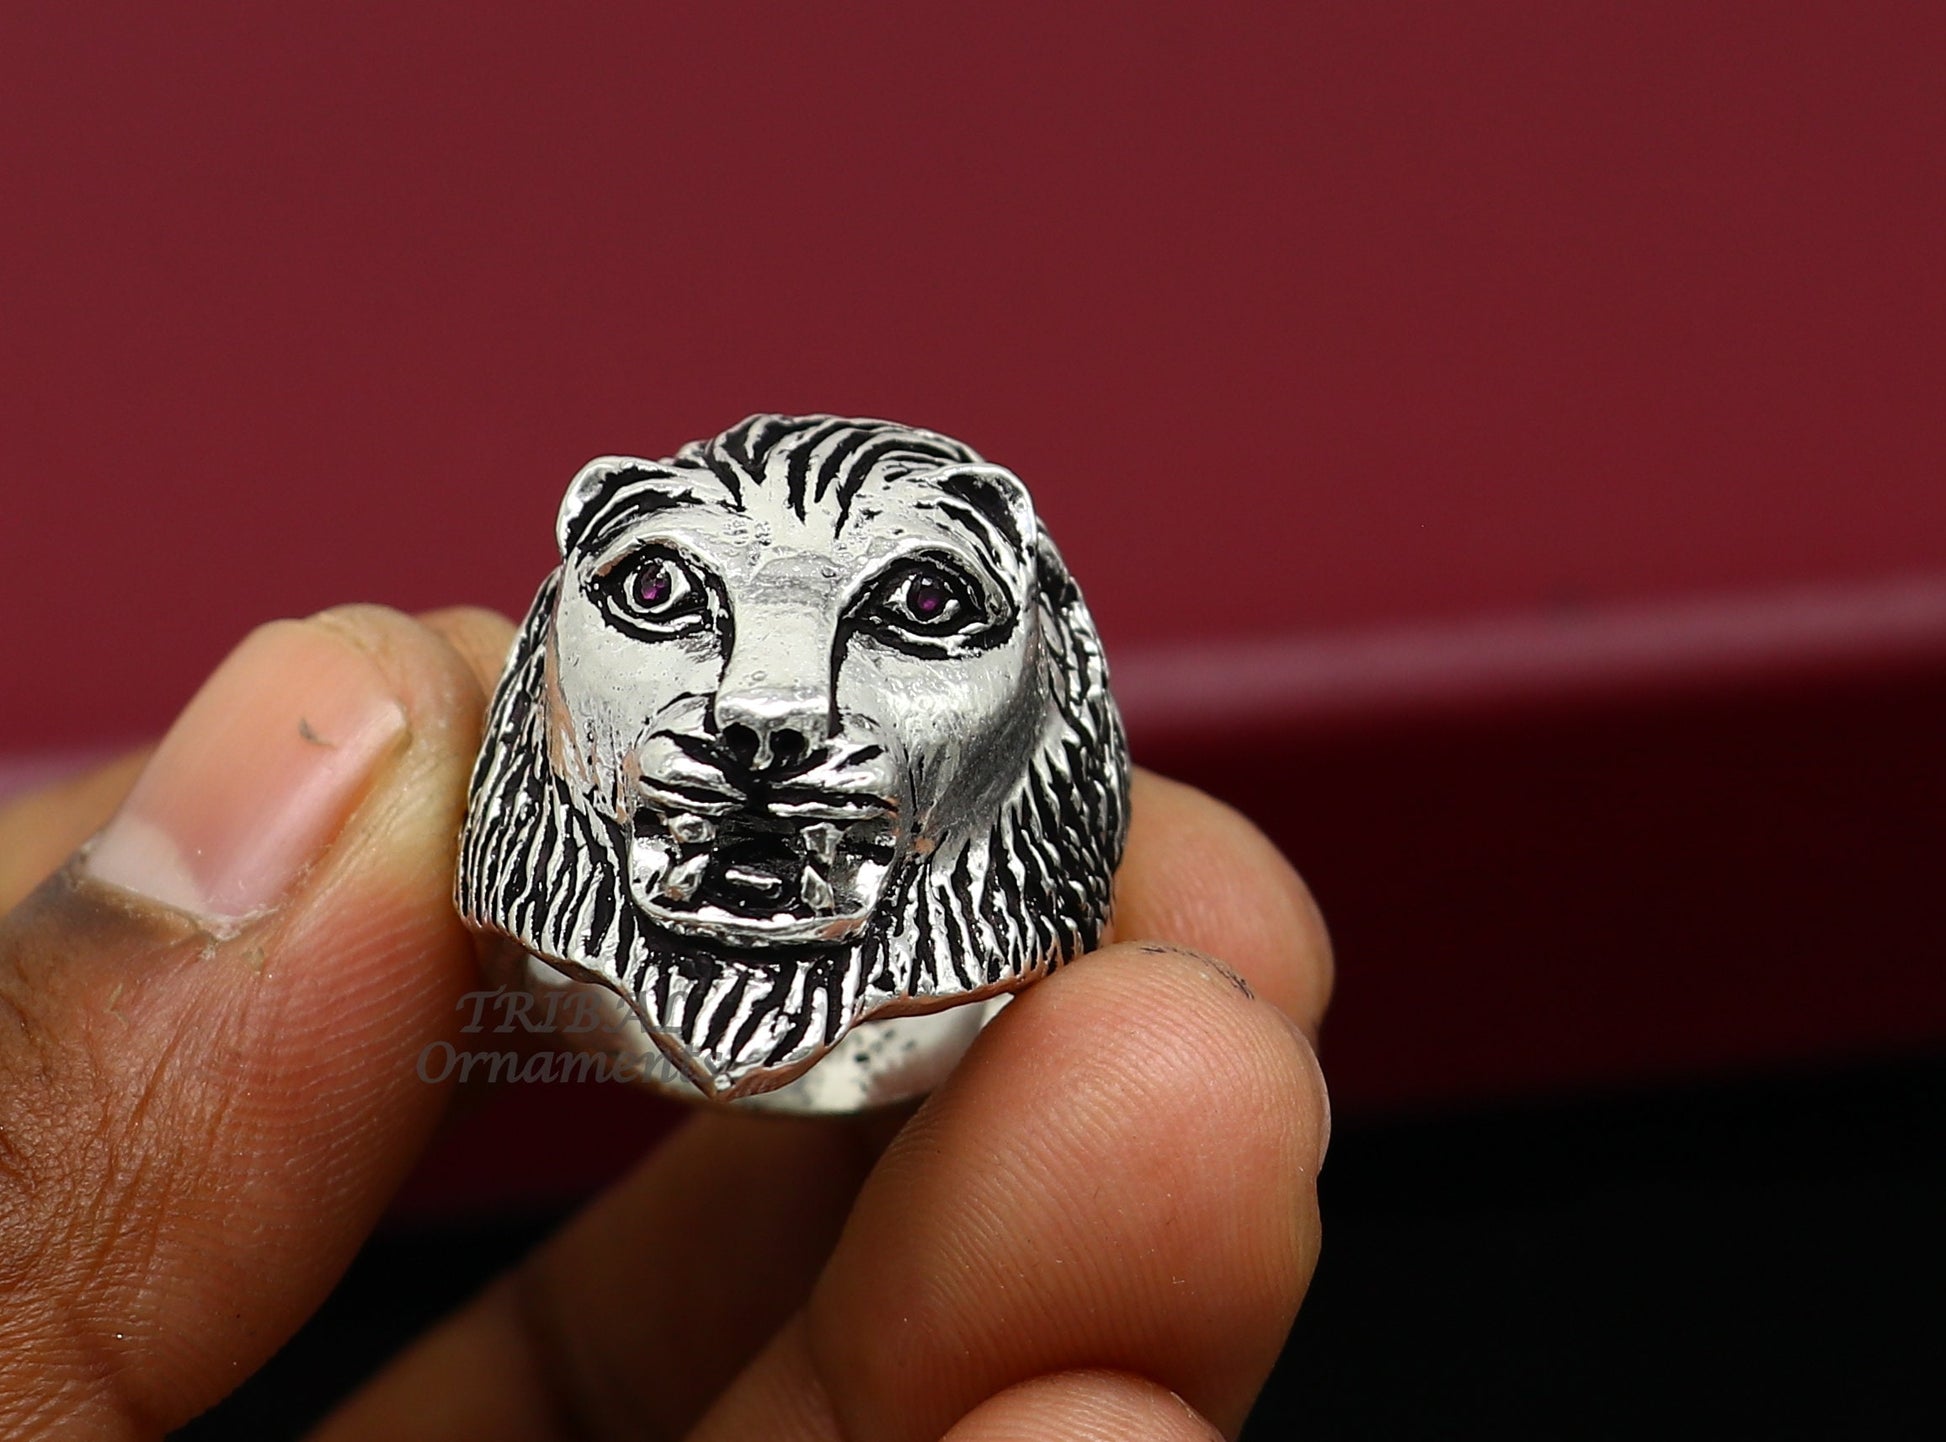 92.5% sterling silver handmade king lion head face high quality unique ring band for gifting, stylish luxury lion ring  sr363 - TRIBAL ORNAMENTS